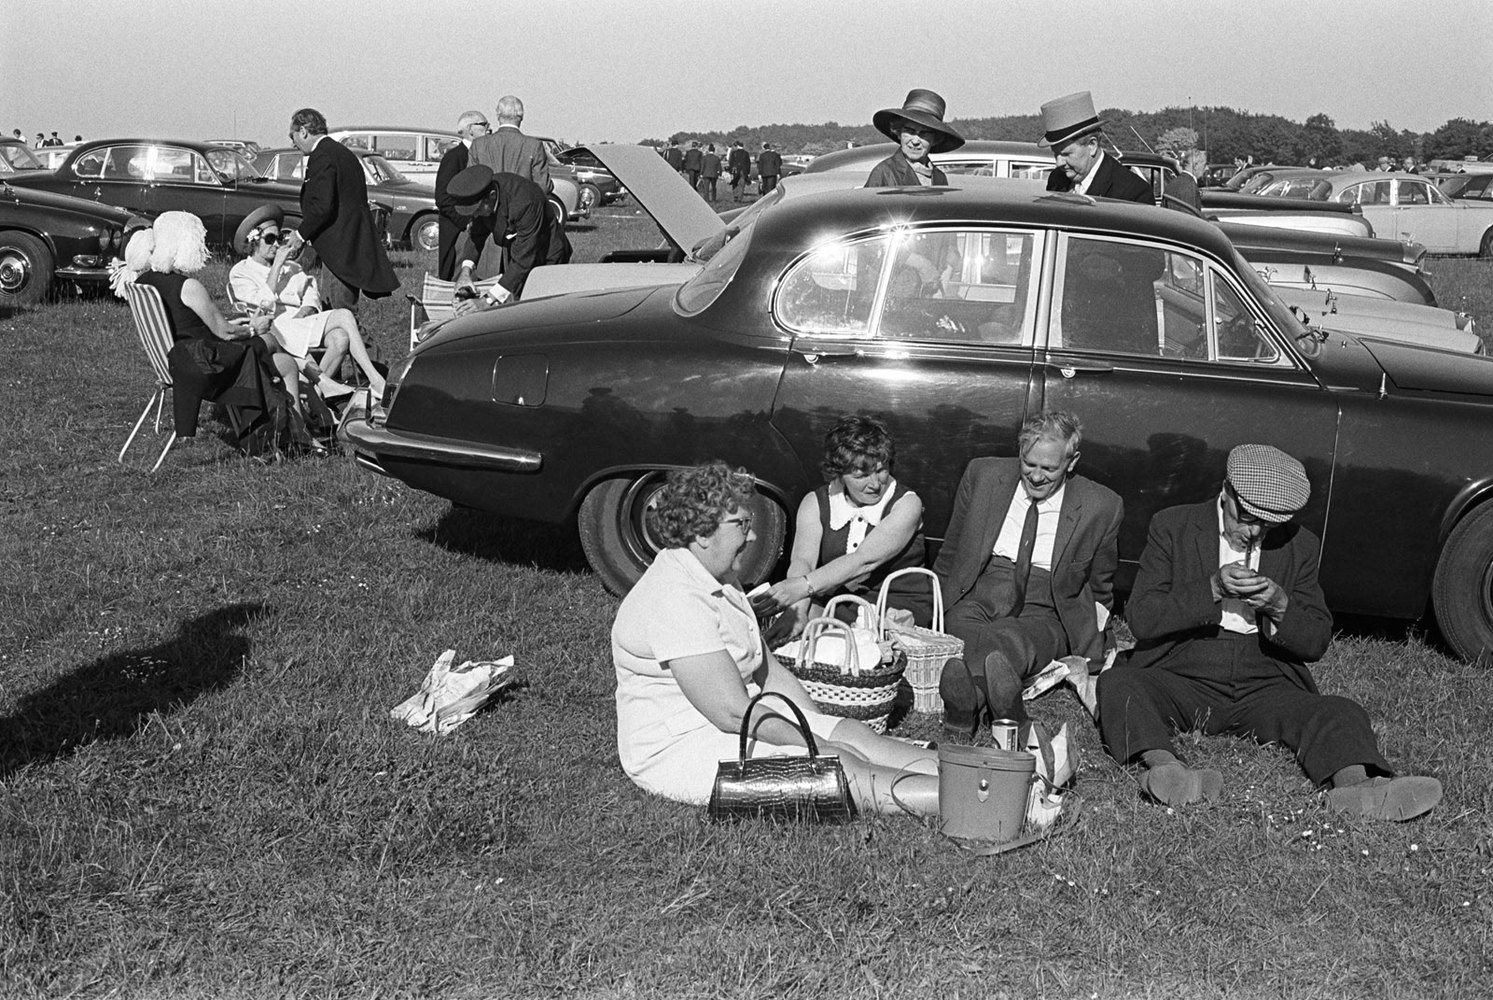 A day at the races, Derby Day picnic horse racing at Epsom Downs, Surrey, 1970